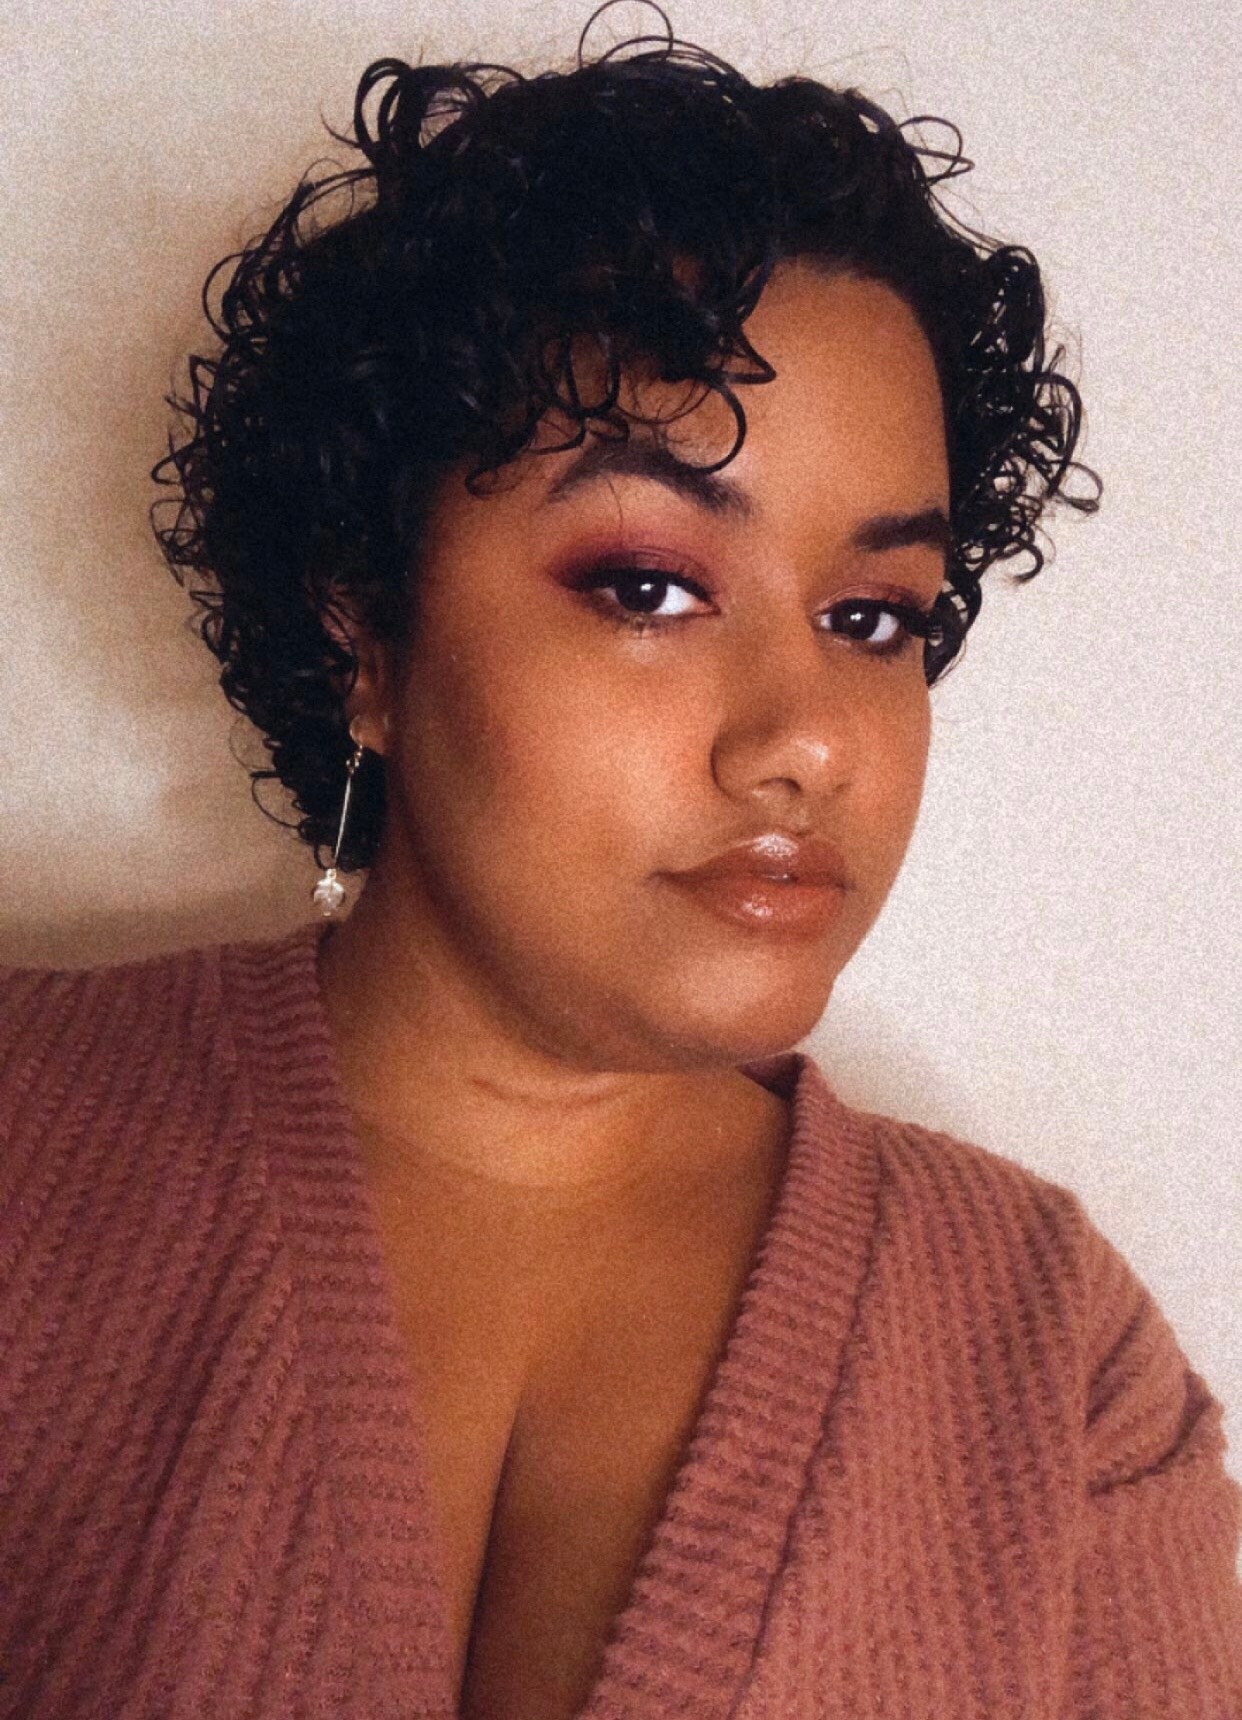 A portrait of singer Genesis Adelia Codallo, a Dominican person who has short curly hair that falls in rings over her forehead and wears a light pink sweater.